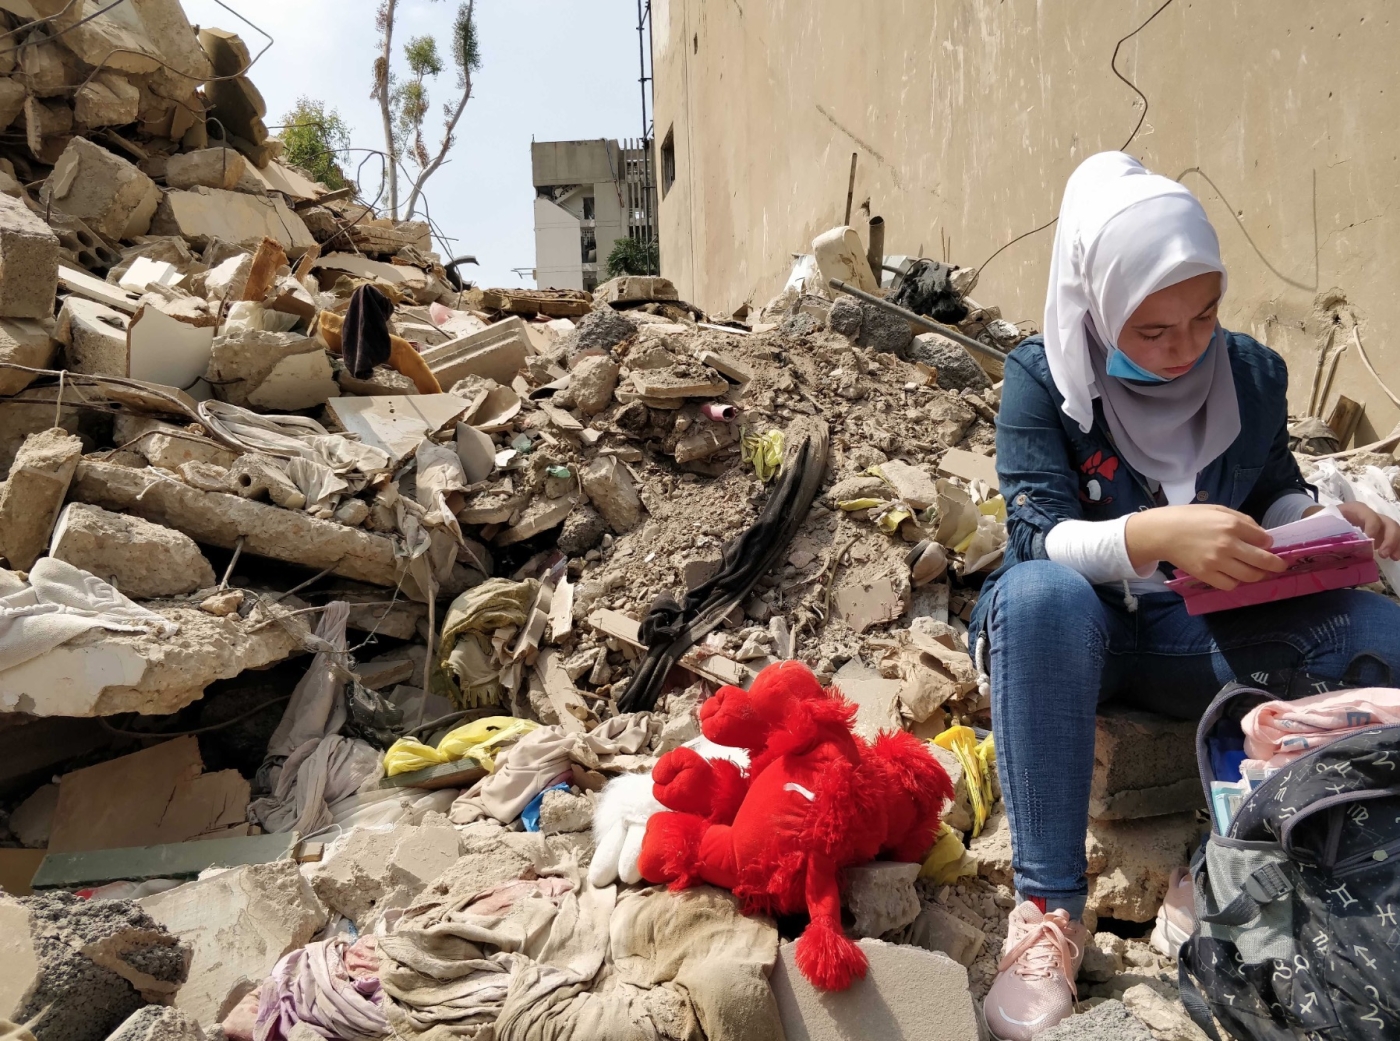 Dima, a Syrian refugee, visits her collapsed home, recovering her backpack and a teddy she found in the rubble after the explosion (MEE/Nadda Osman)